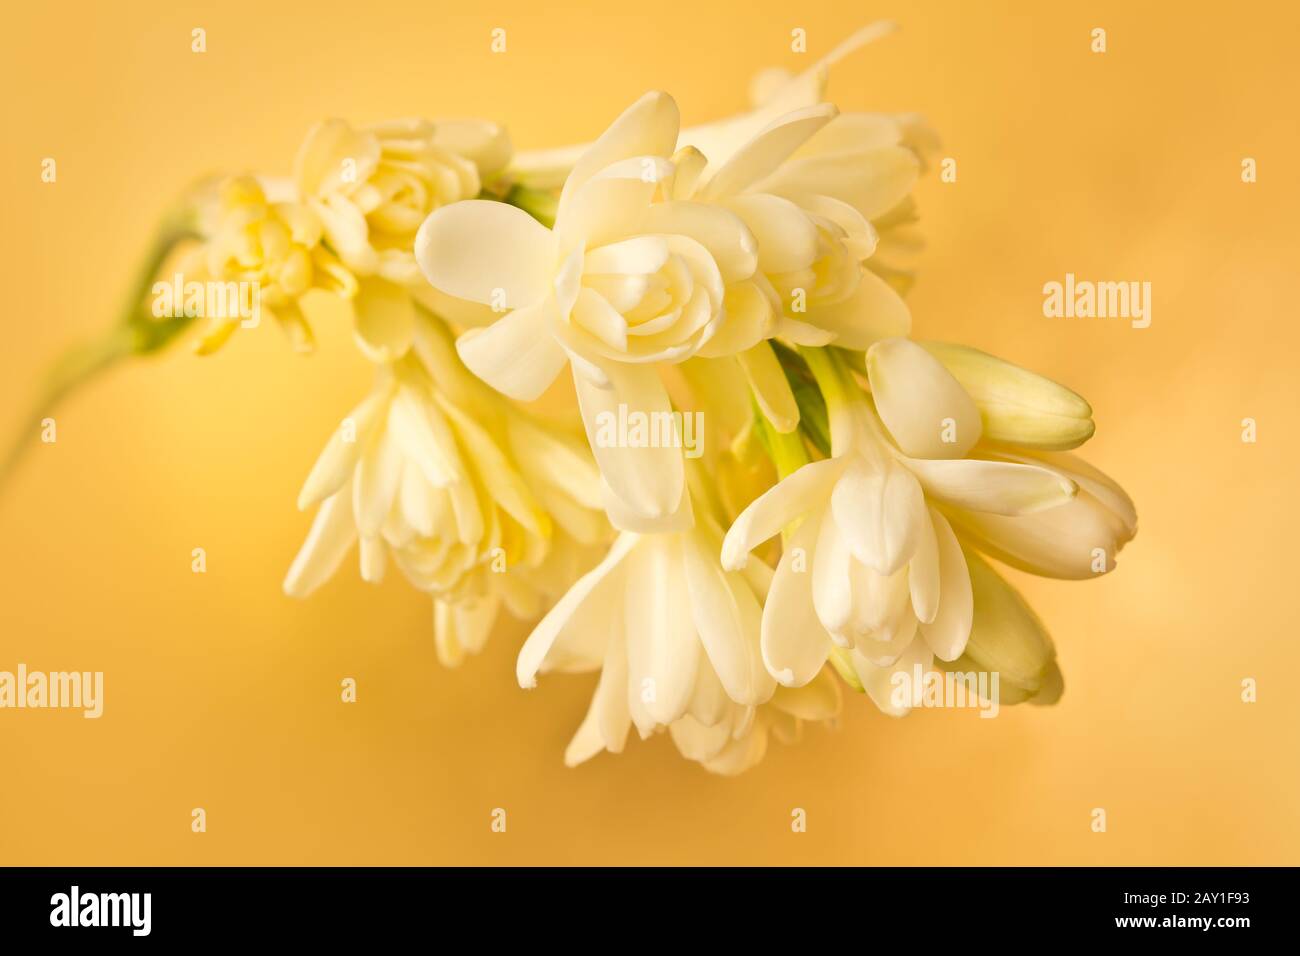 Agave Amica Or Tuberose Essential Oil In Perfume Bottle Isolated On White  Background Stock Photo - Download Image Now - iStock